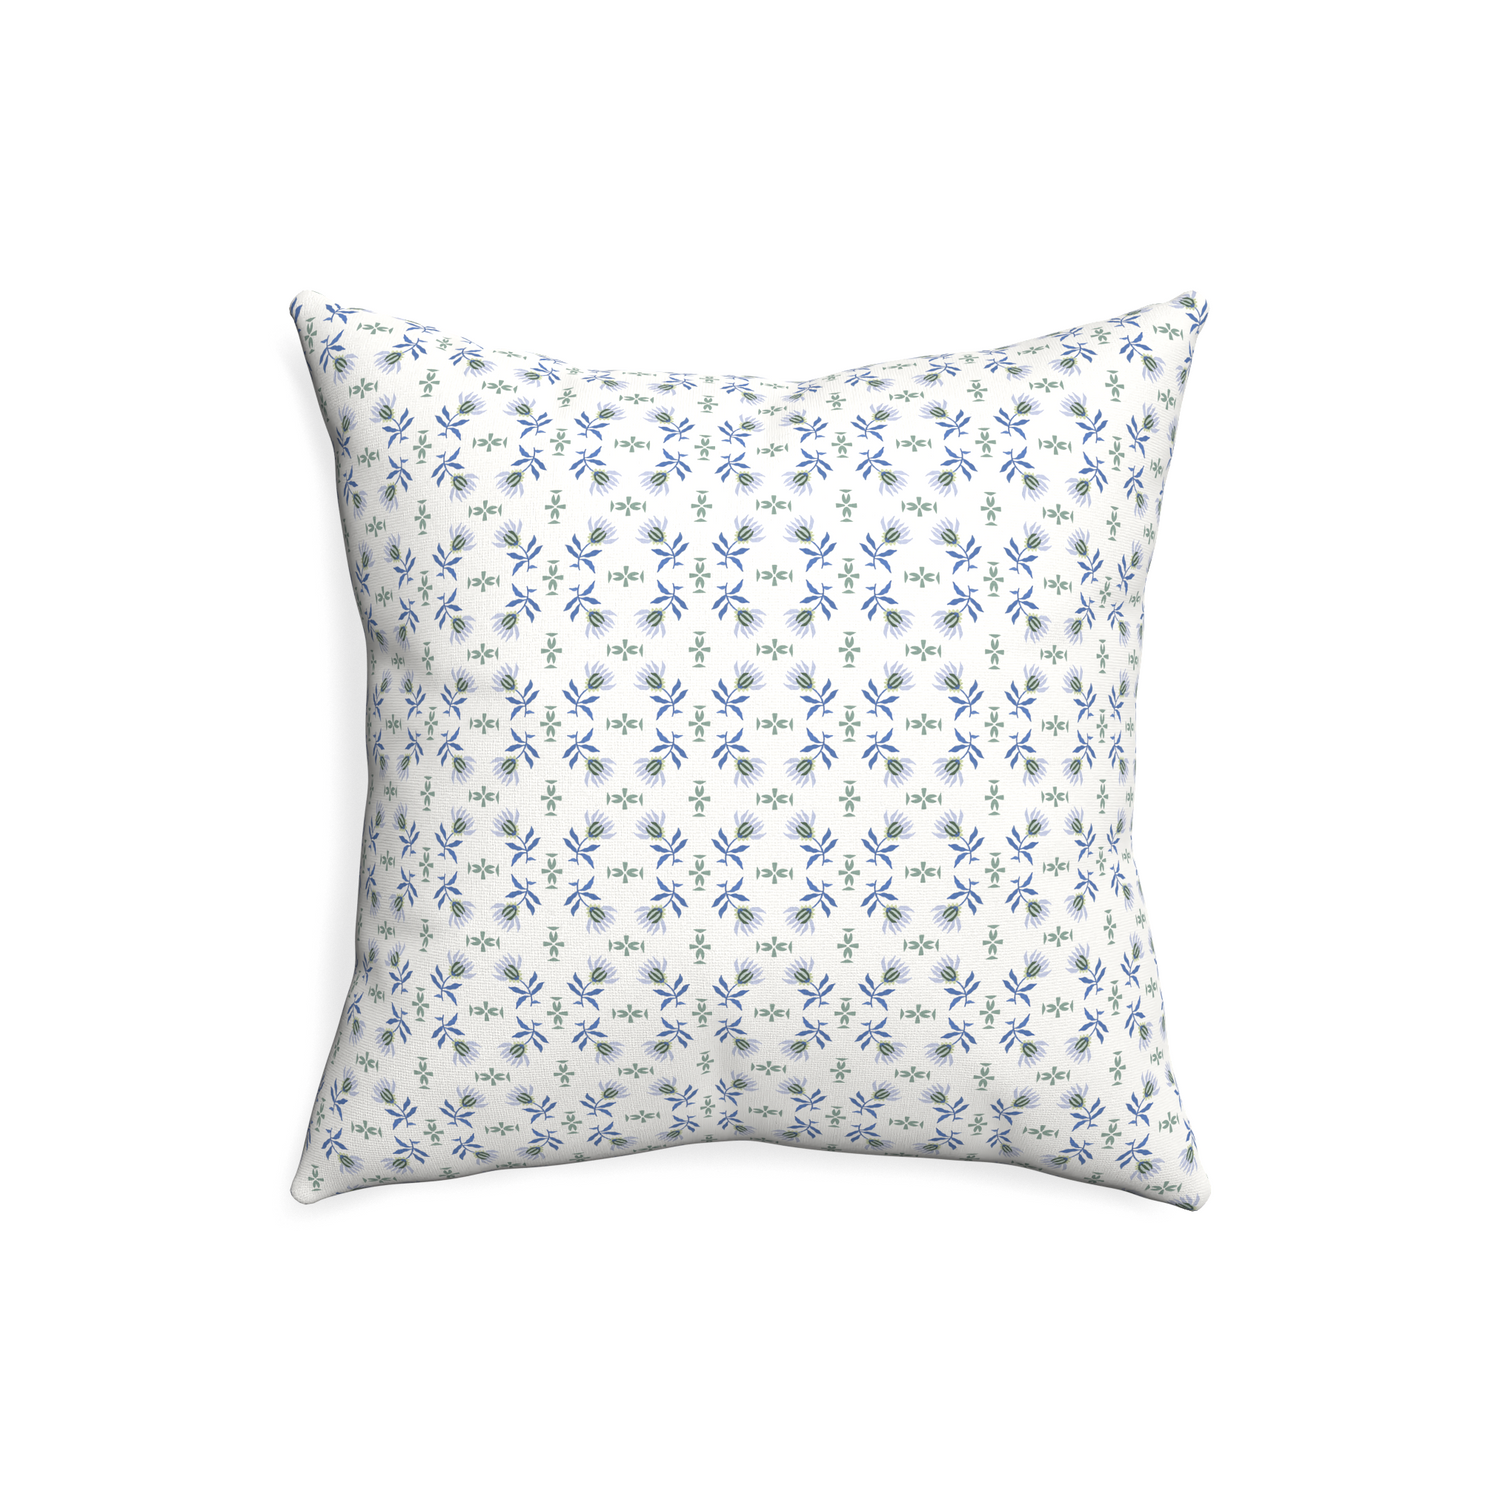 20-square lee custom pillow with none on white background